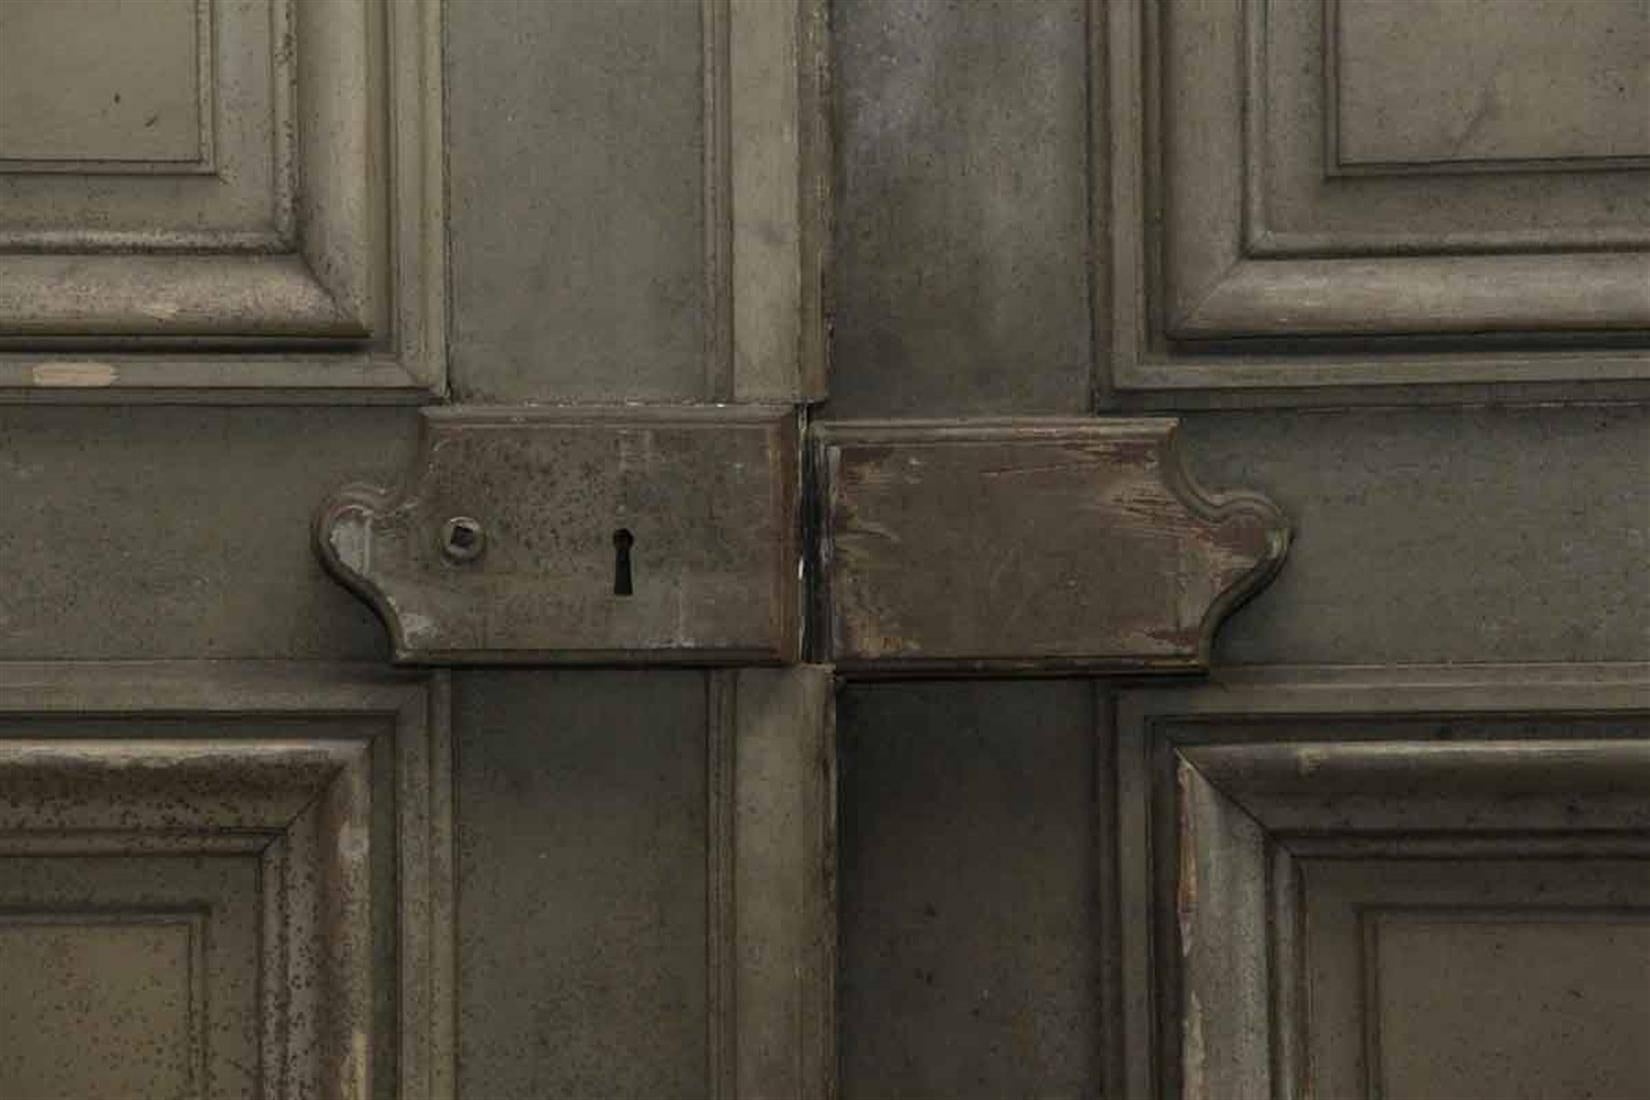 french provincial doors